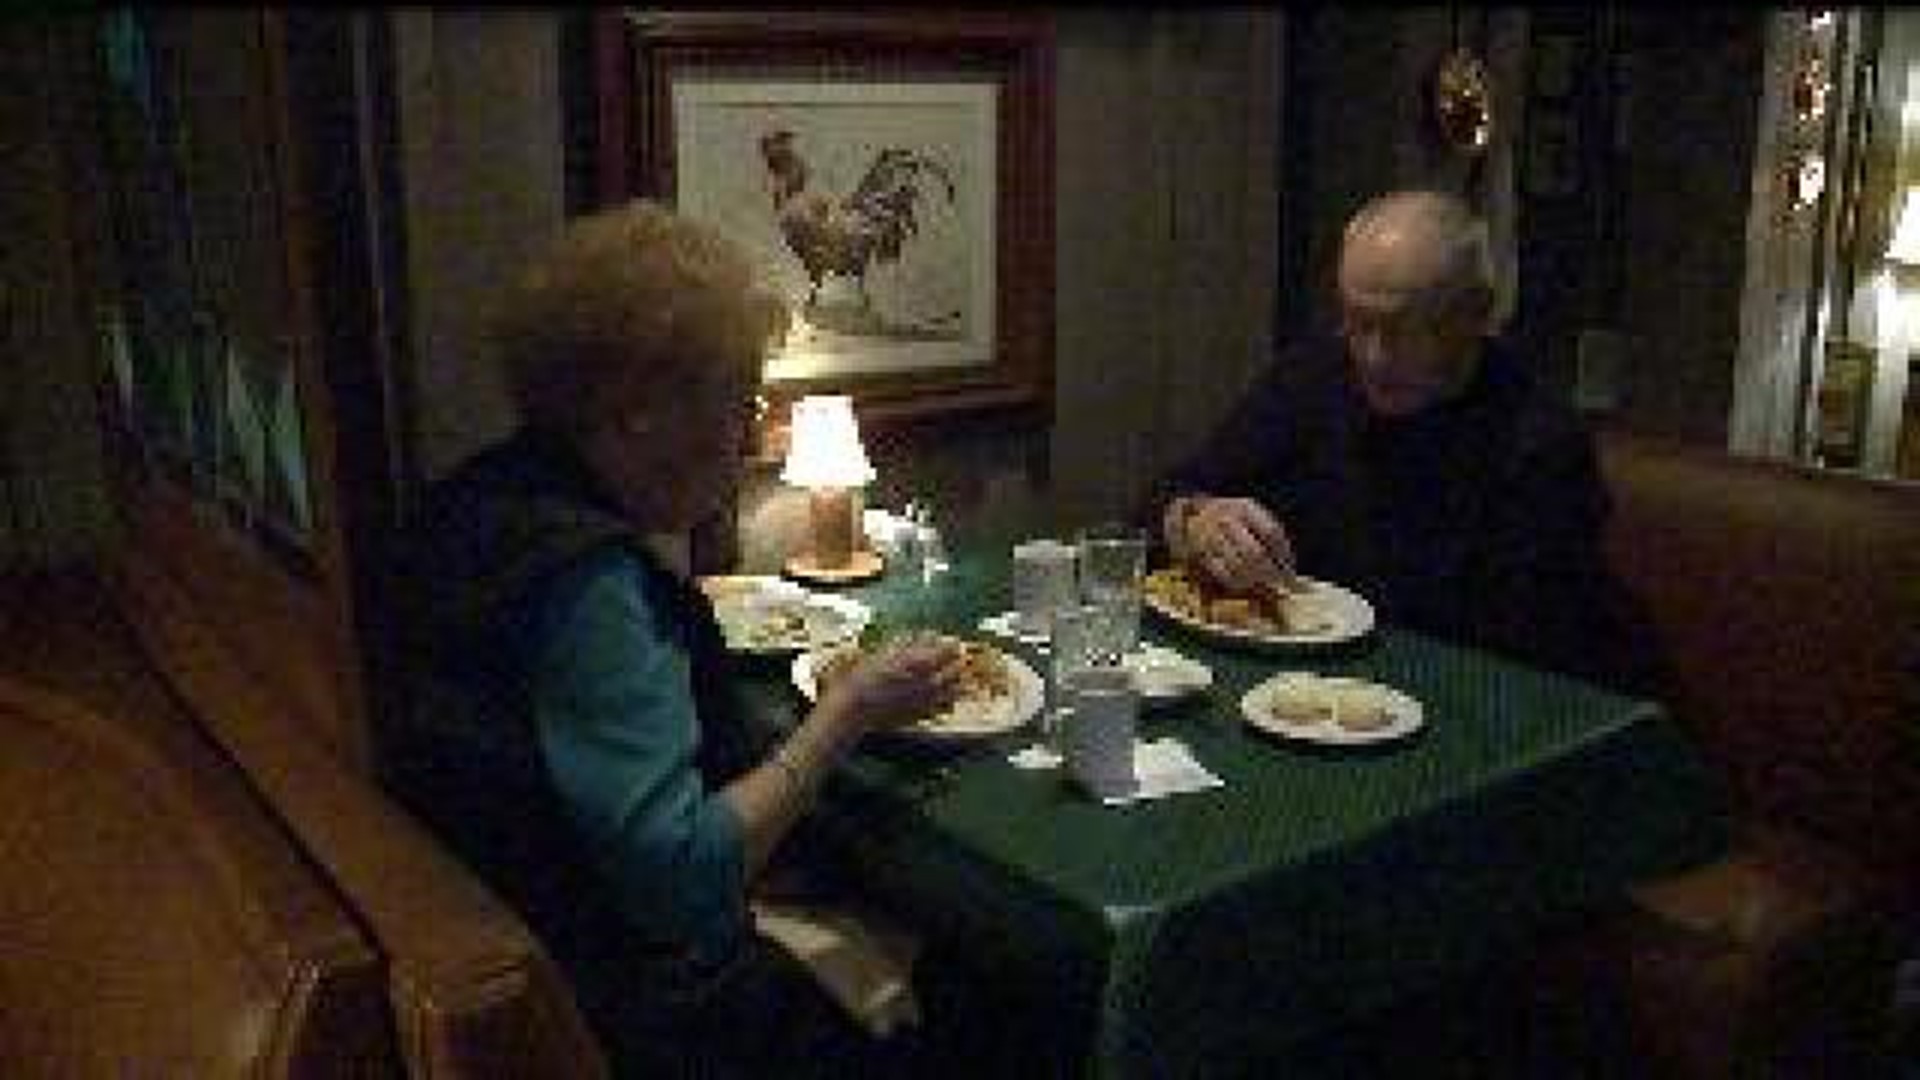 Romance is on the menu at the Candlelight Inn in Sterling